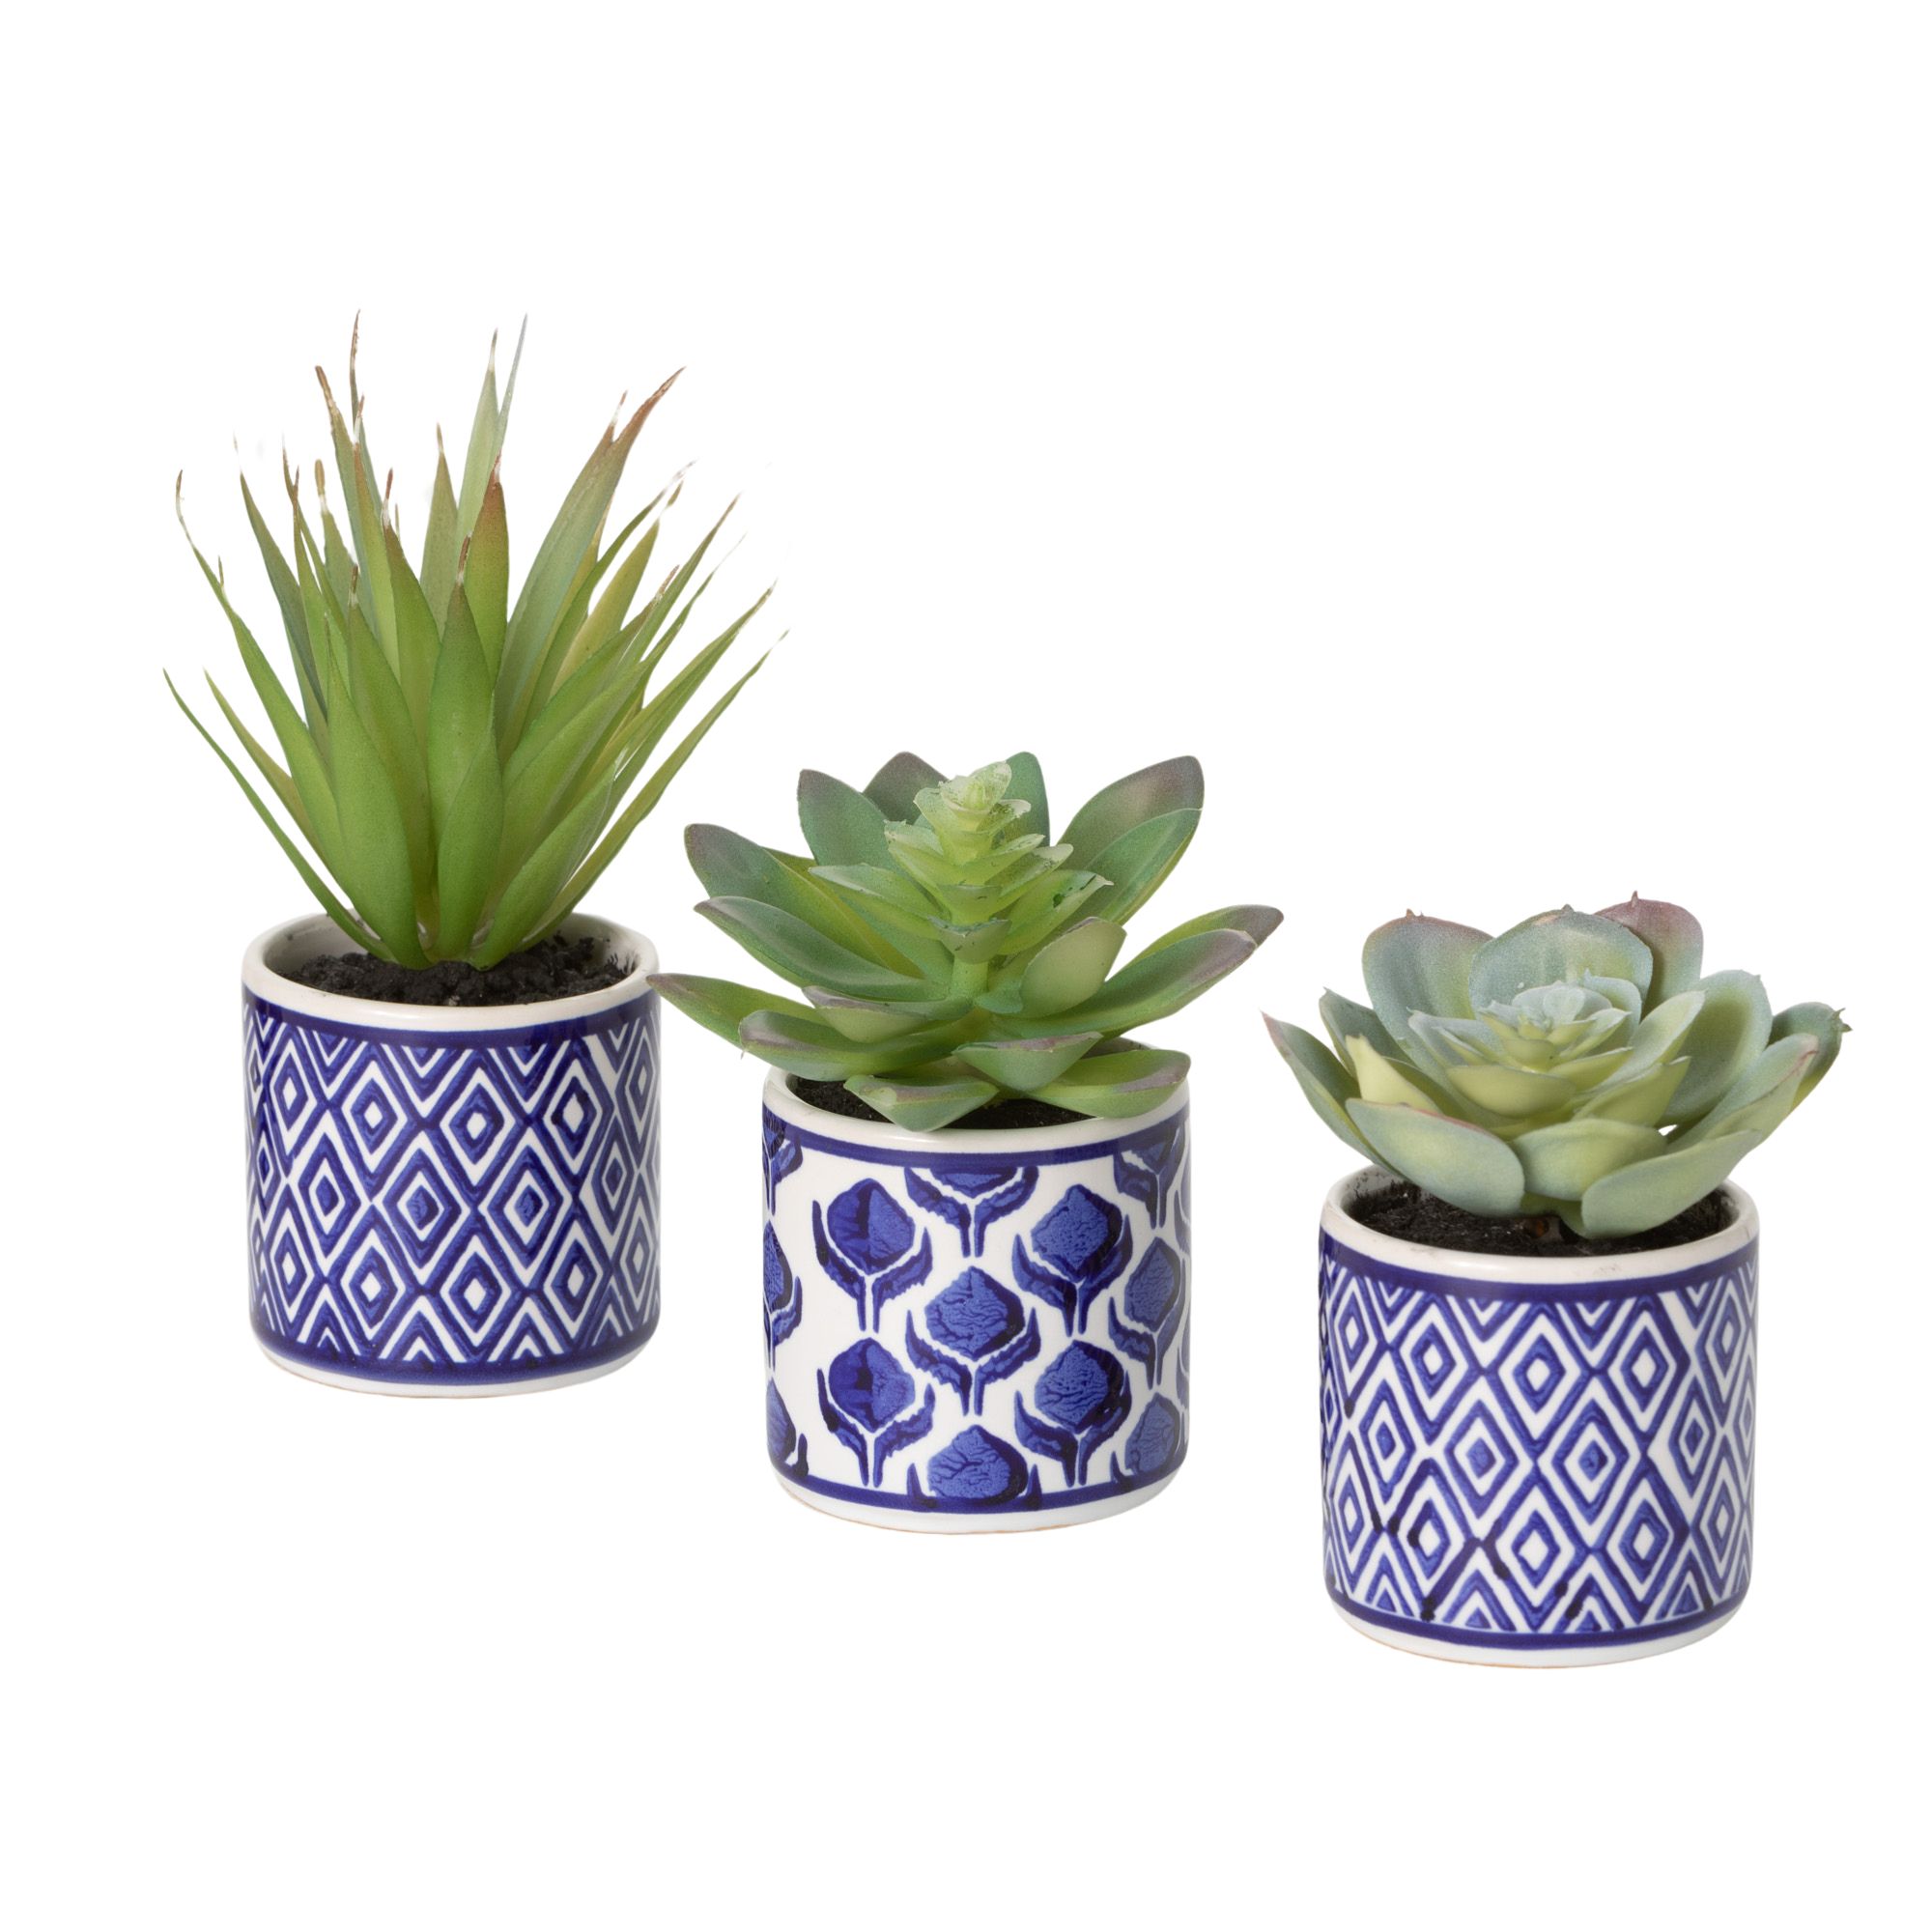 Sullivans Artificial Succulent Trio In Printed Pots Set of 3, 4"H Green - image 4 of 4